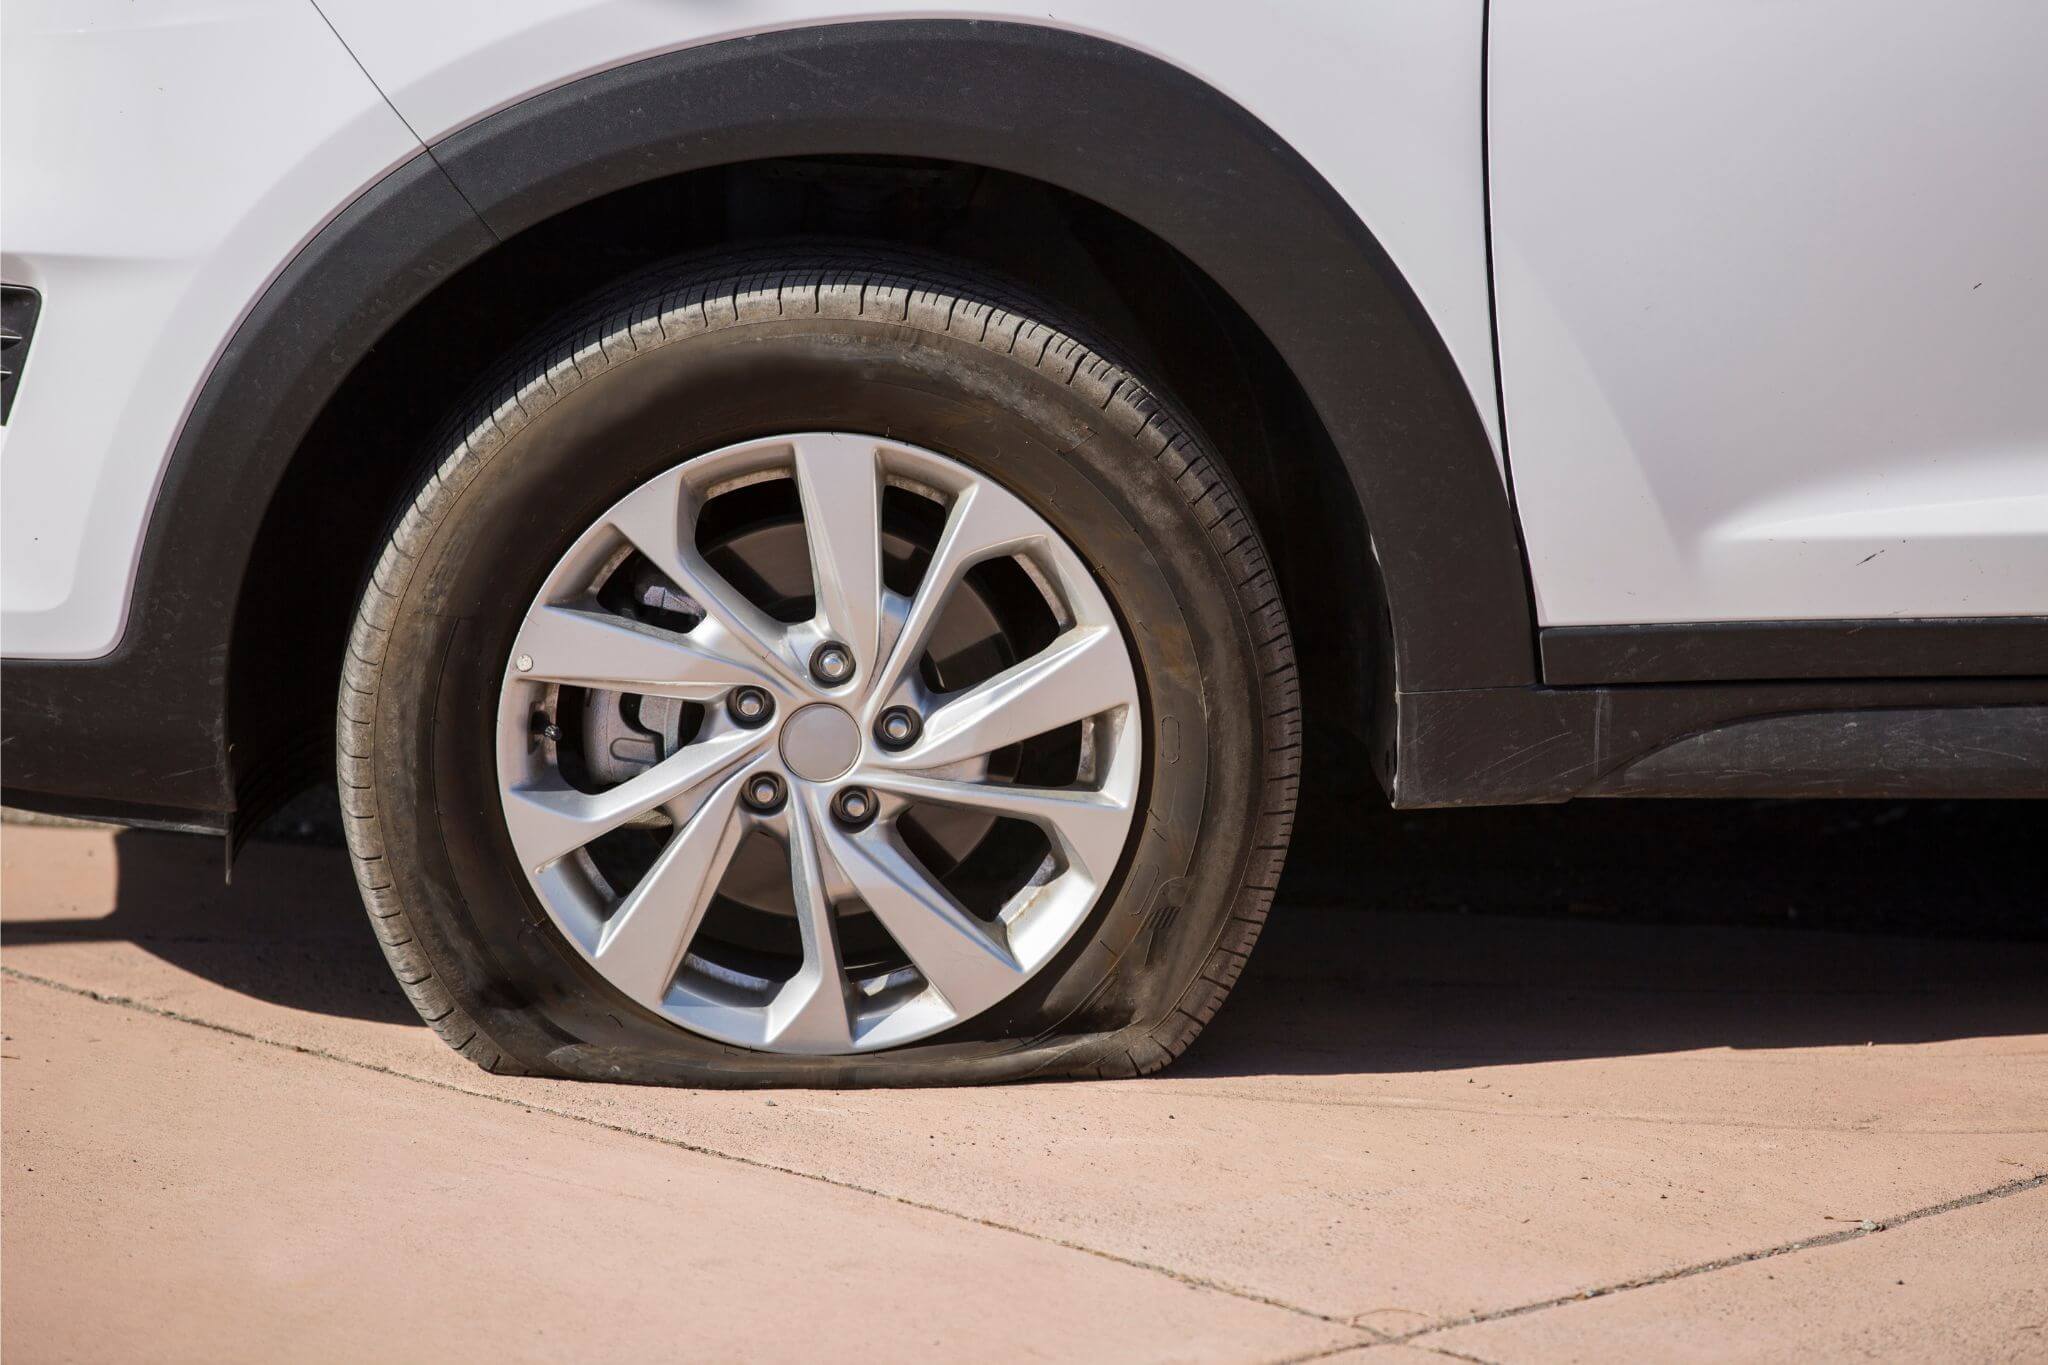 How To Give Someone A Flat Tire Without Them Knowing